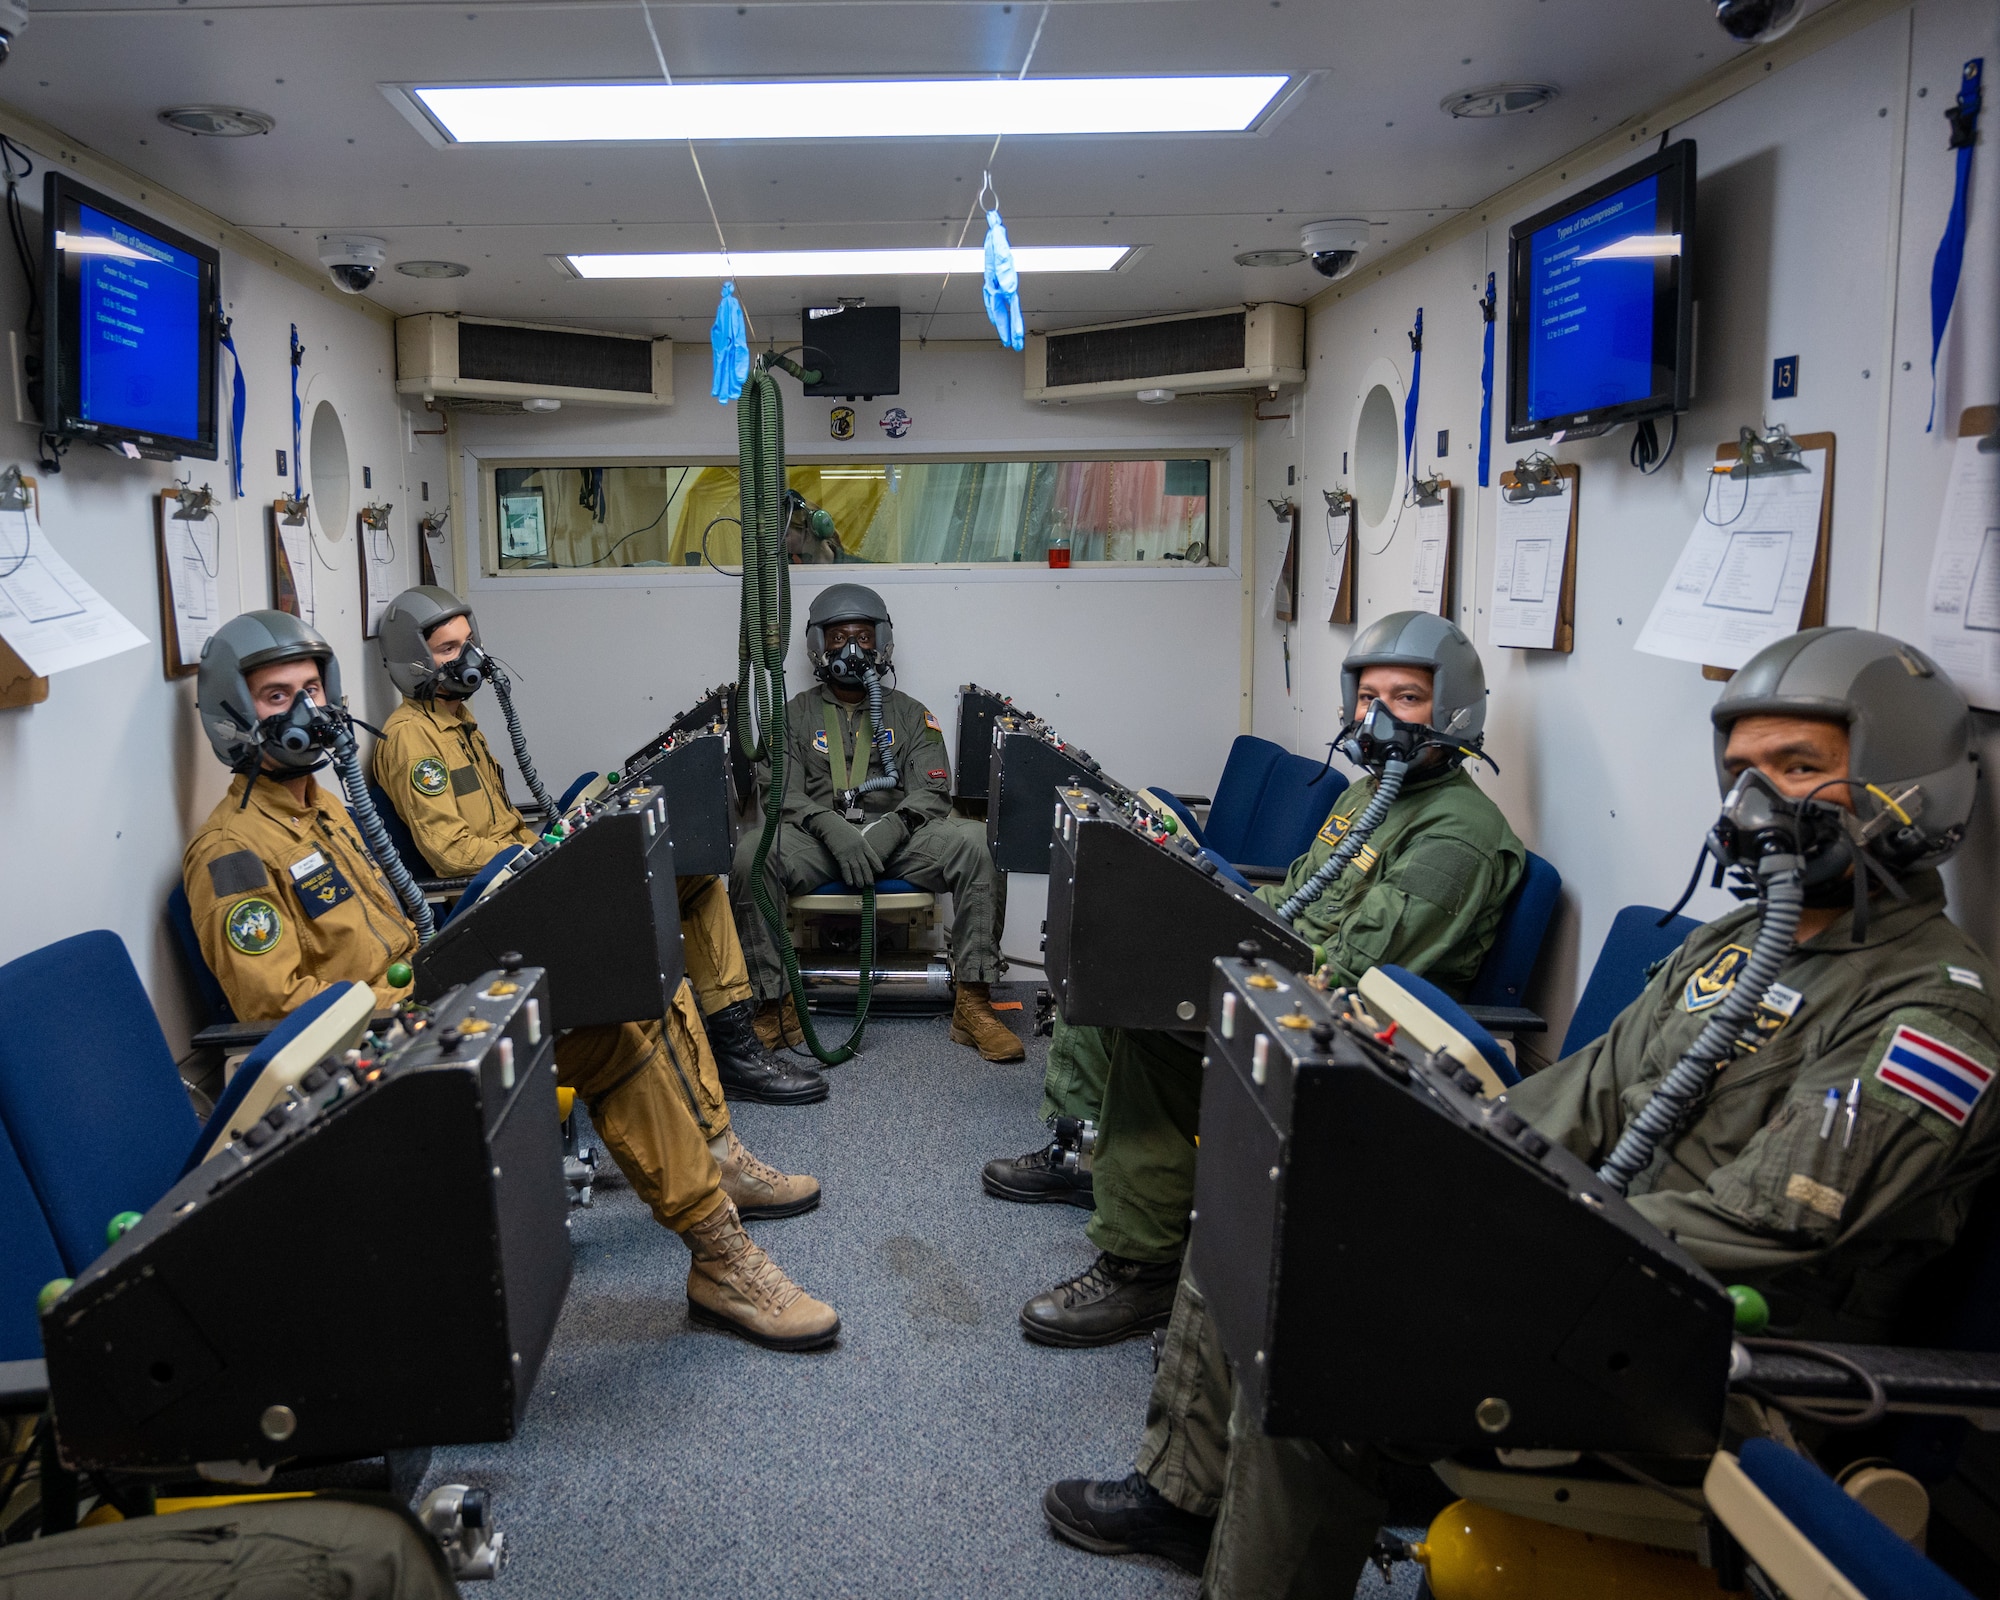 U.S. Air Force altitude chamber technicians and International pilots "denite" before going up in altitude in the hypobolic chamber at Laughlin Air Force Base, Texas, Aug. 14, 2023. Deniting is the process of purging extra nitrogen from the bloodstream to ensure that pilots do not undergo decompression sickness. (U.S. Air Force photo by Senior Airman Nicholas Larsen)